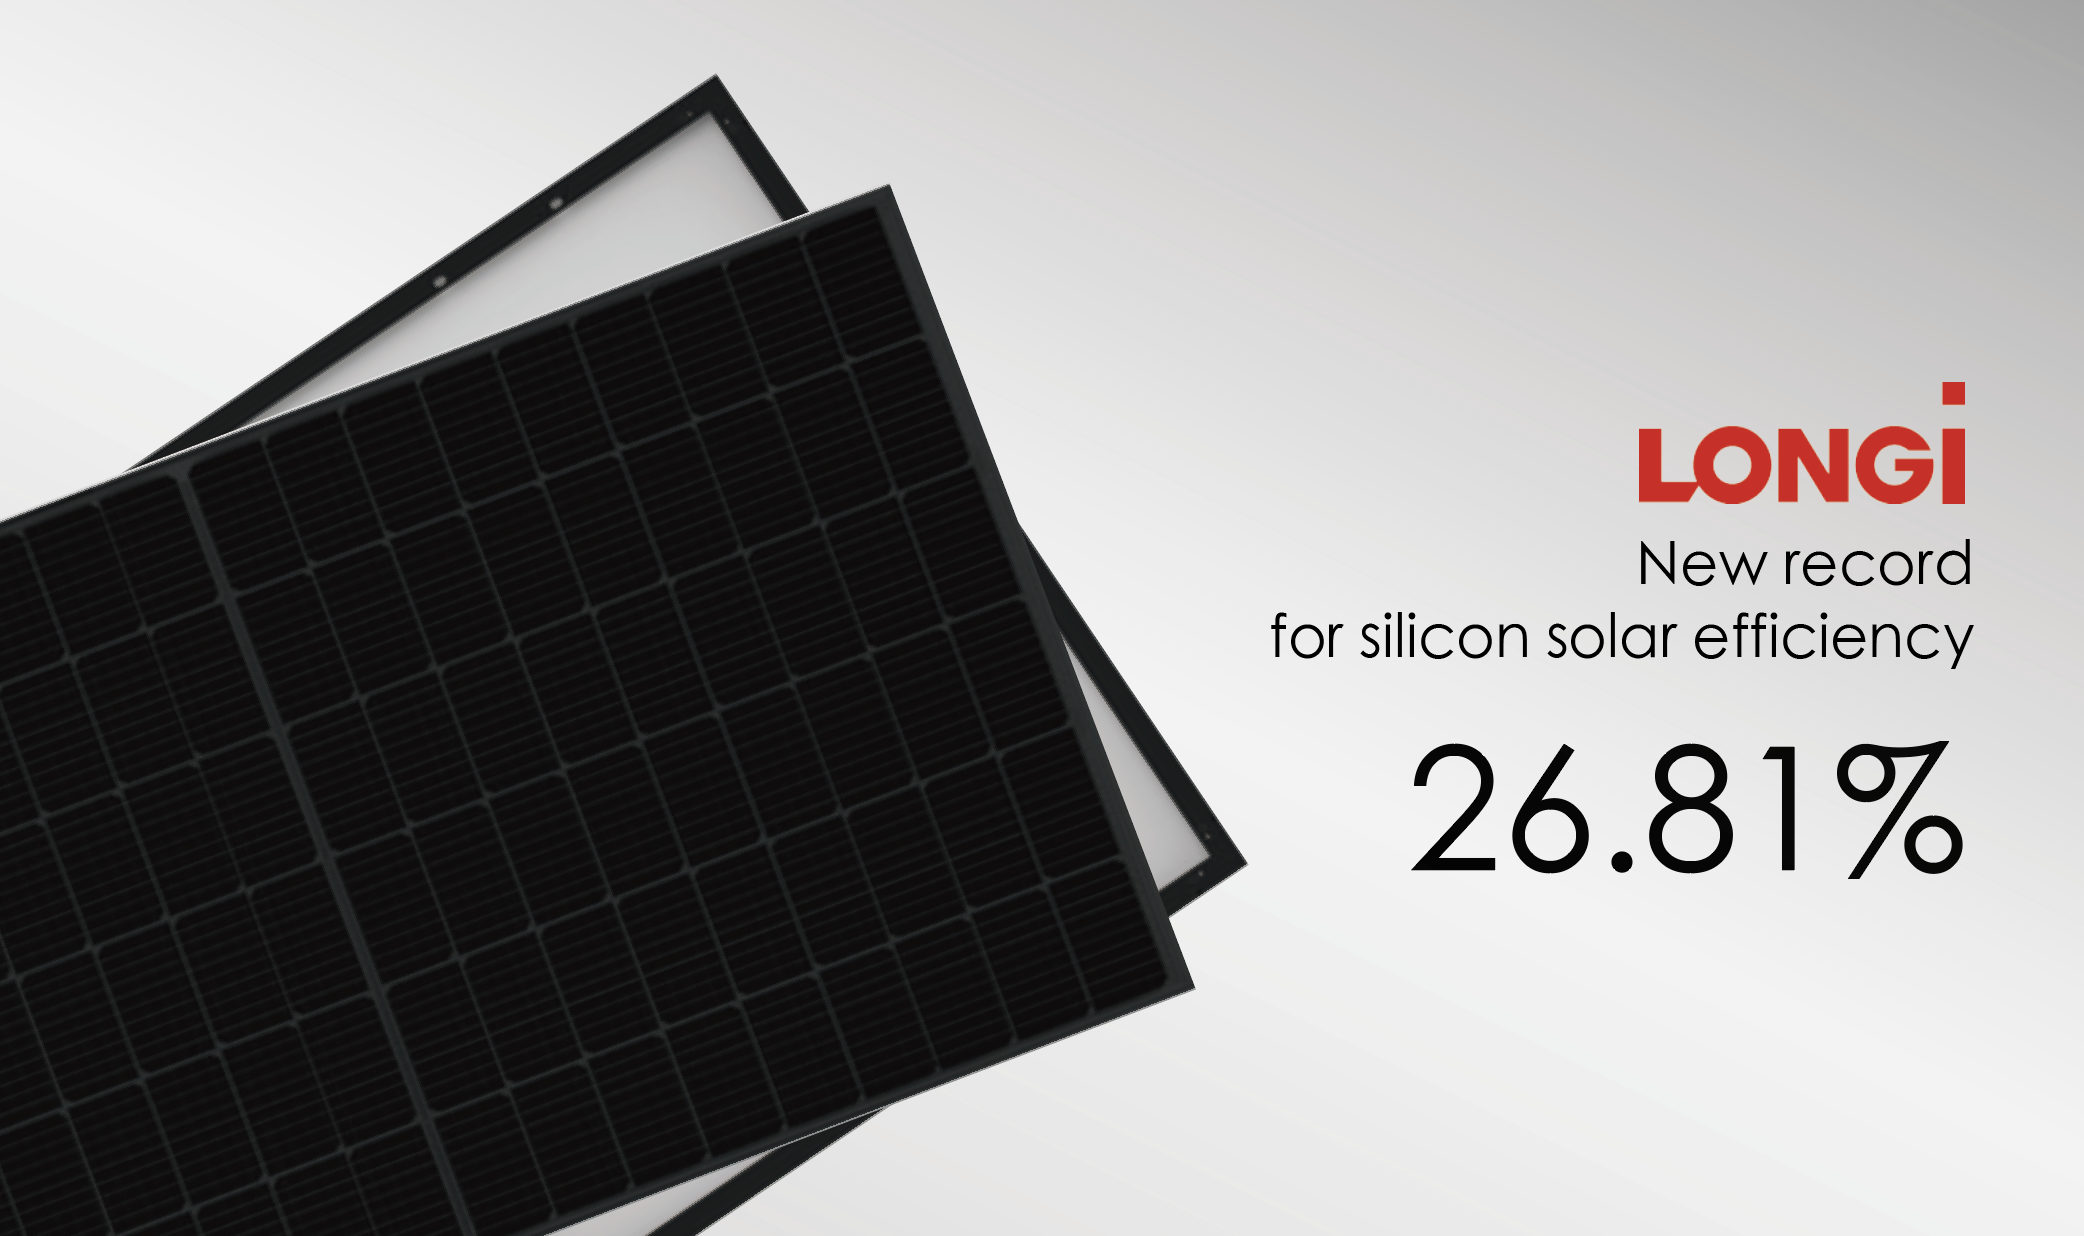 First time in history! China sets new world record for silicon solar cell efficiency